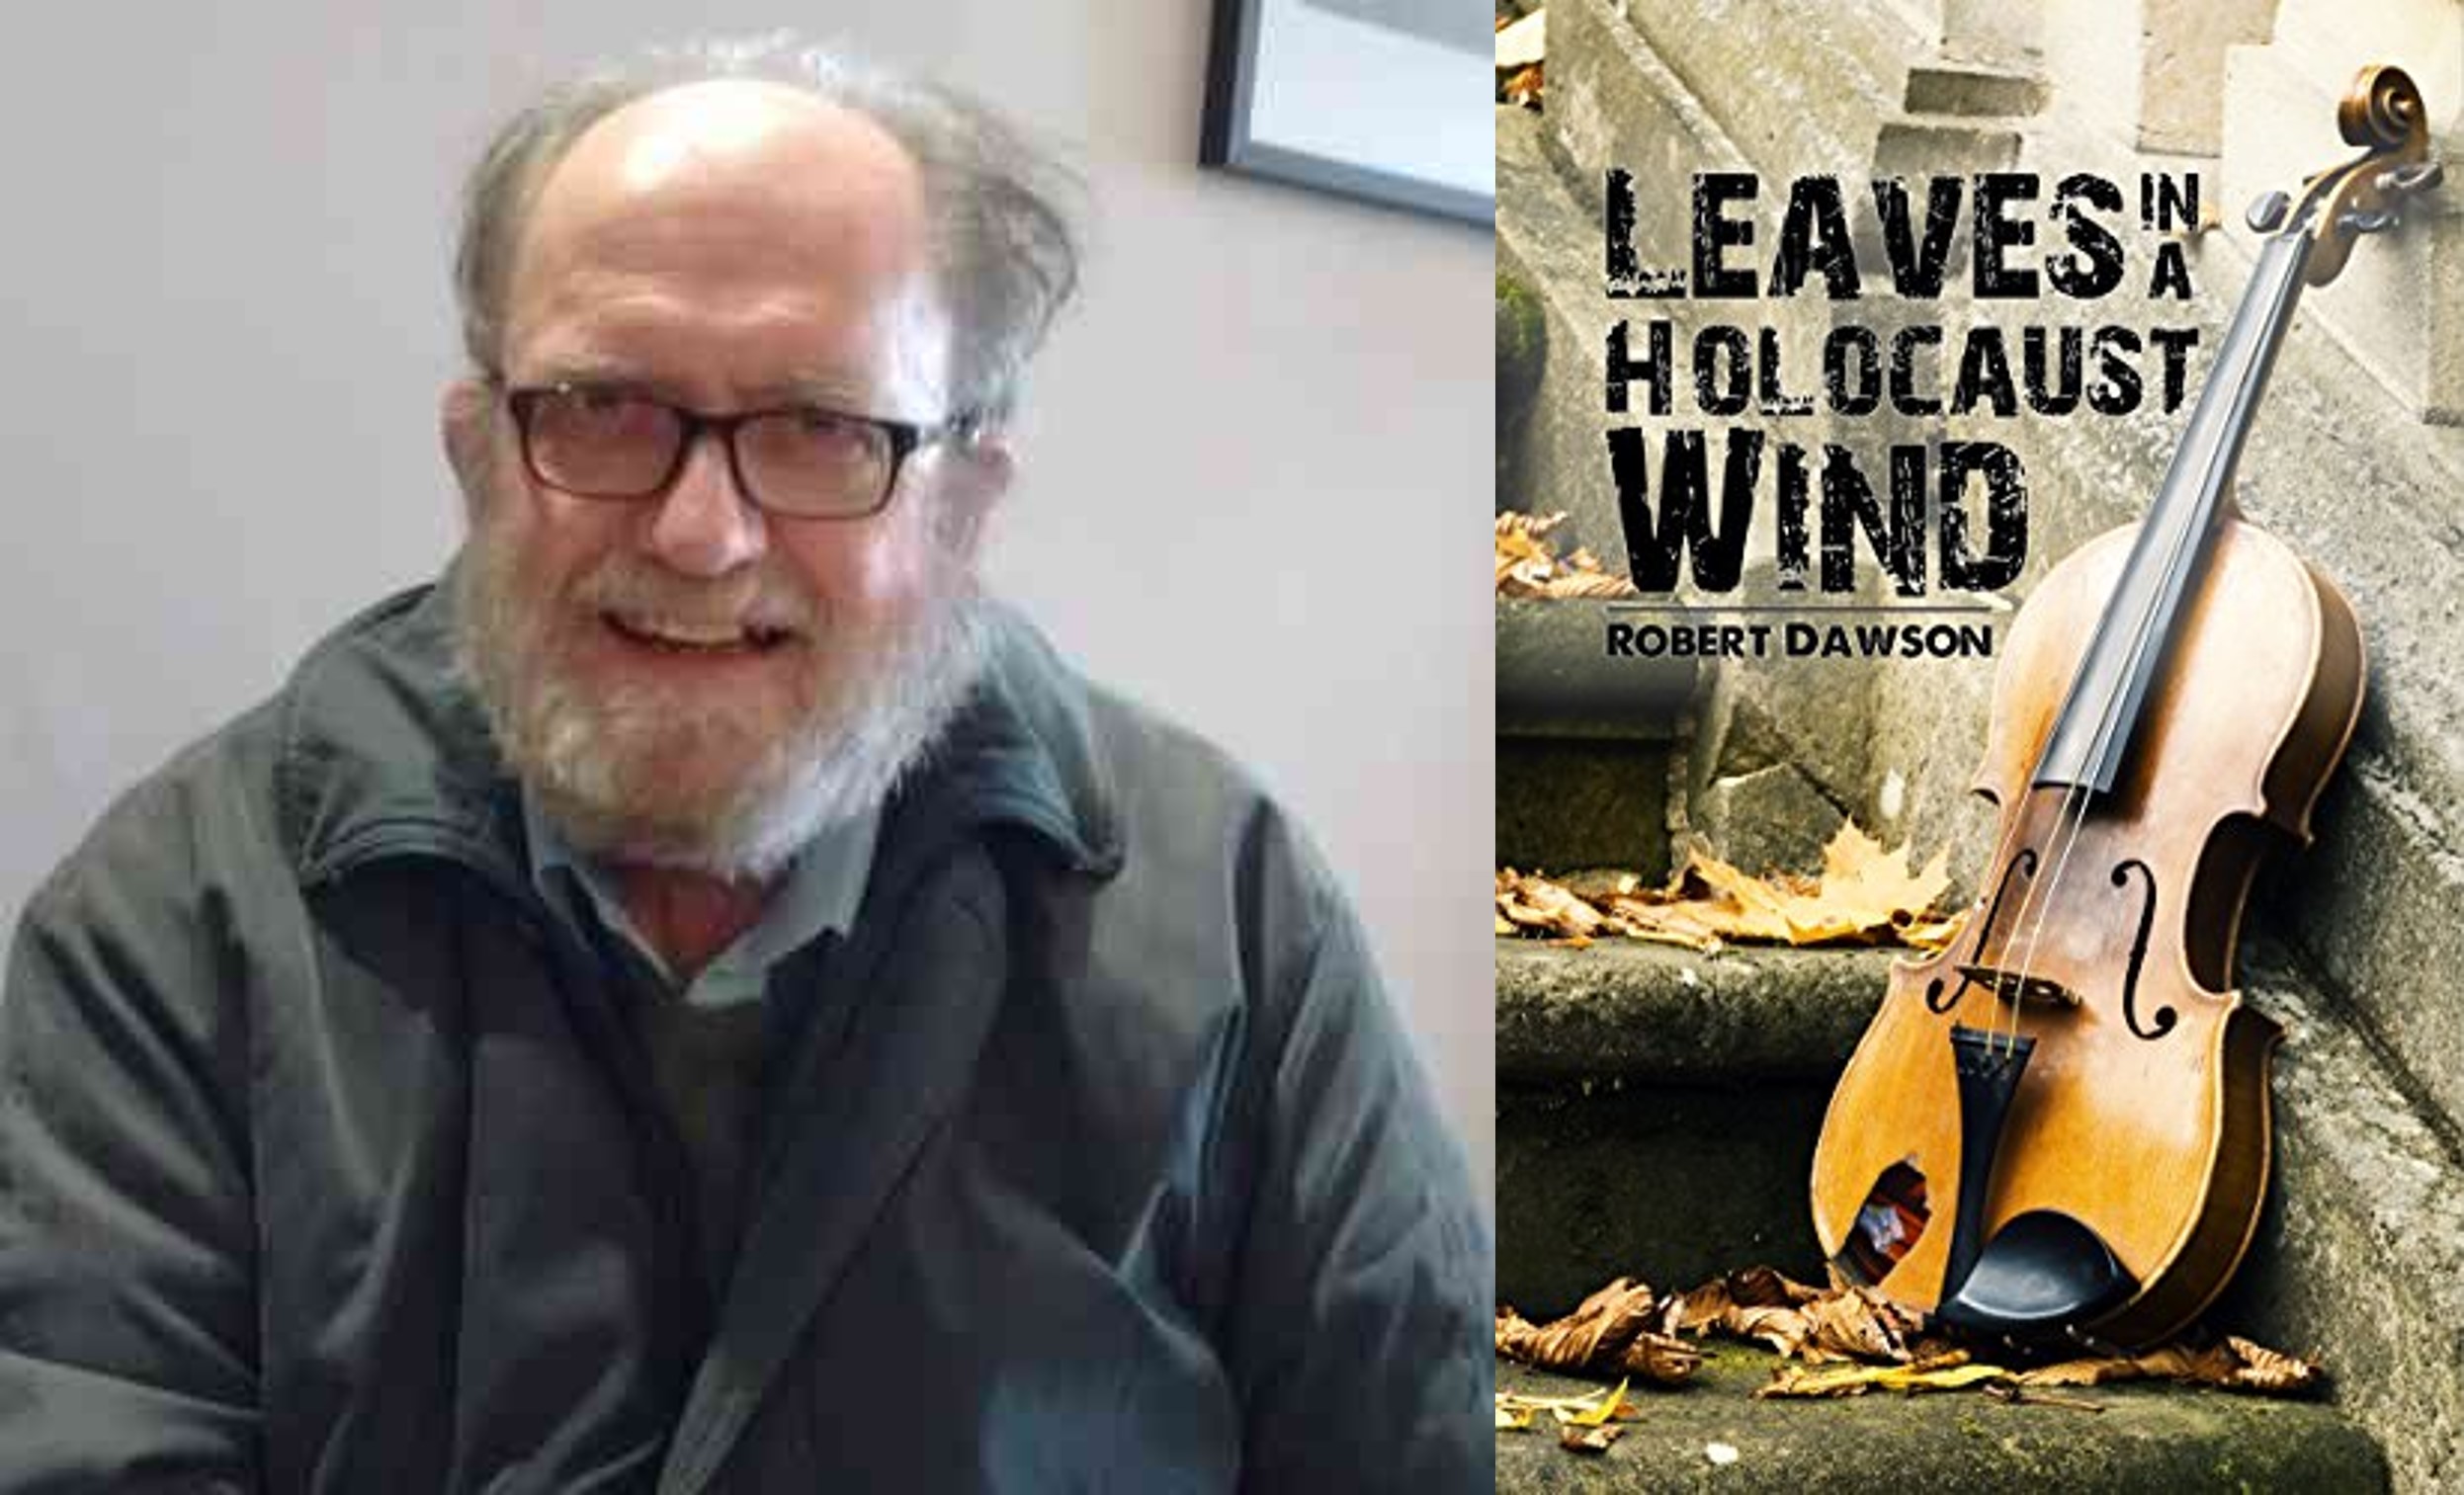 Leaves in a Holocaust Wind with author Robert Dawson